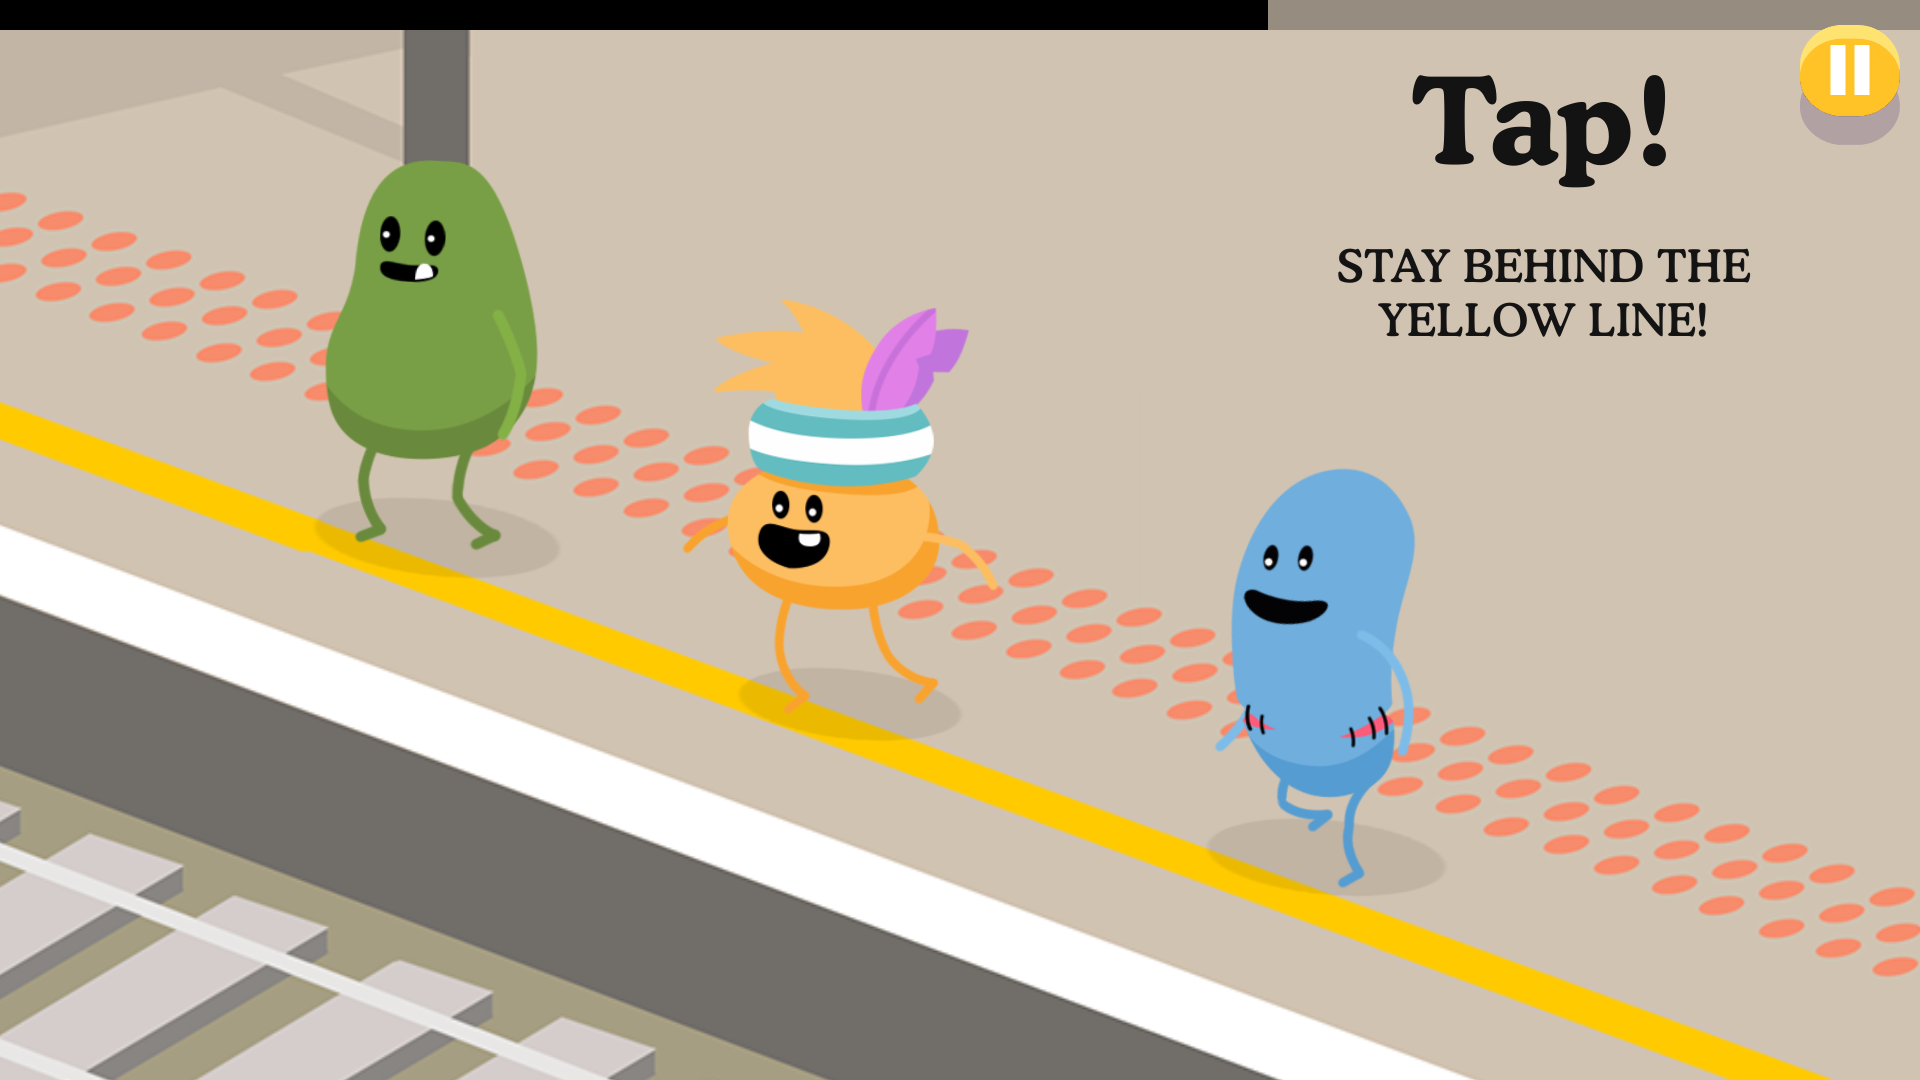 Android application Dumb Ways to Die 2: The Games screenshort